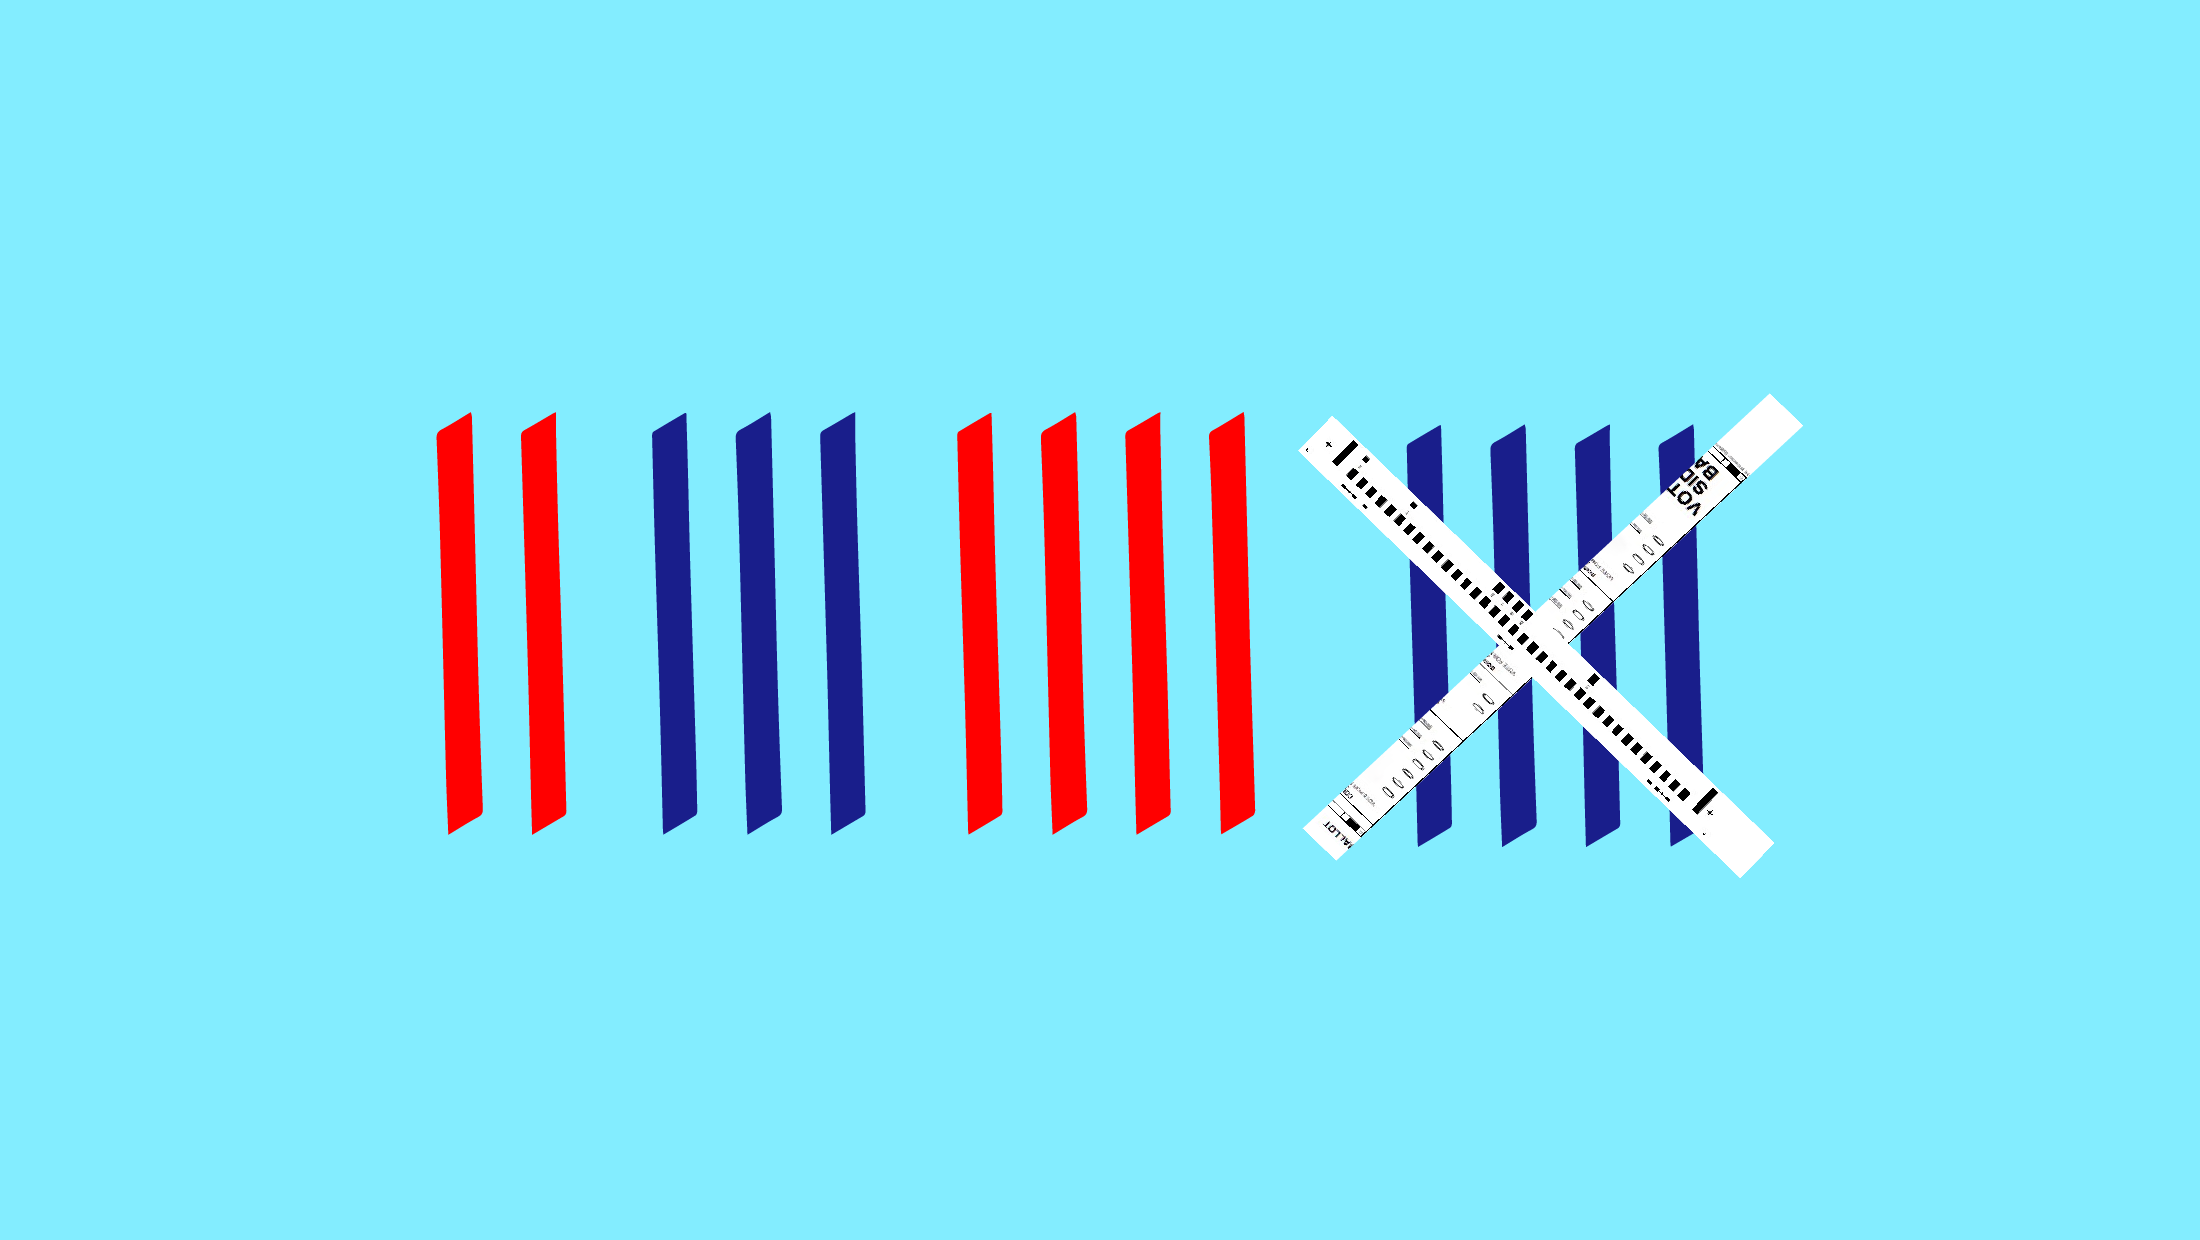 Four sets of alternating red-and-blue tally marks, with two ballots forming an "X" through the last set of tallies